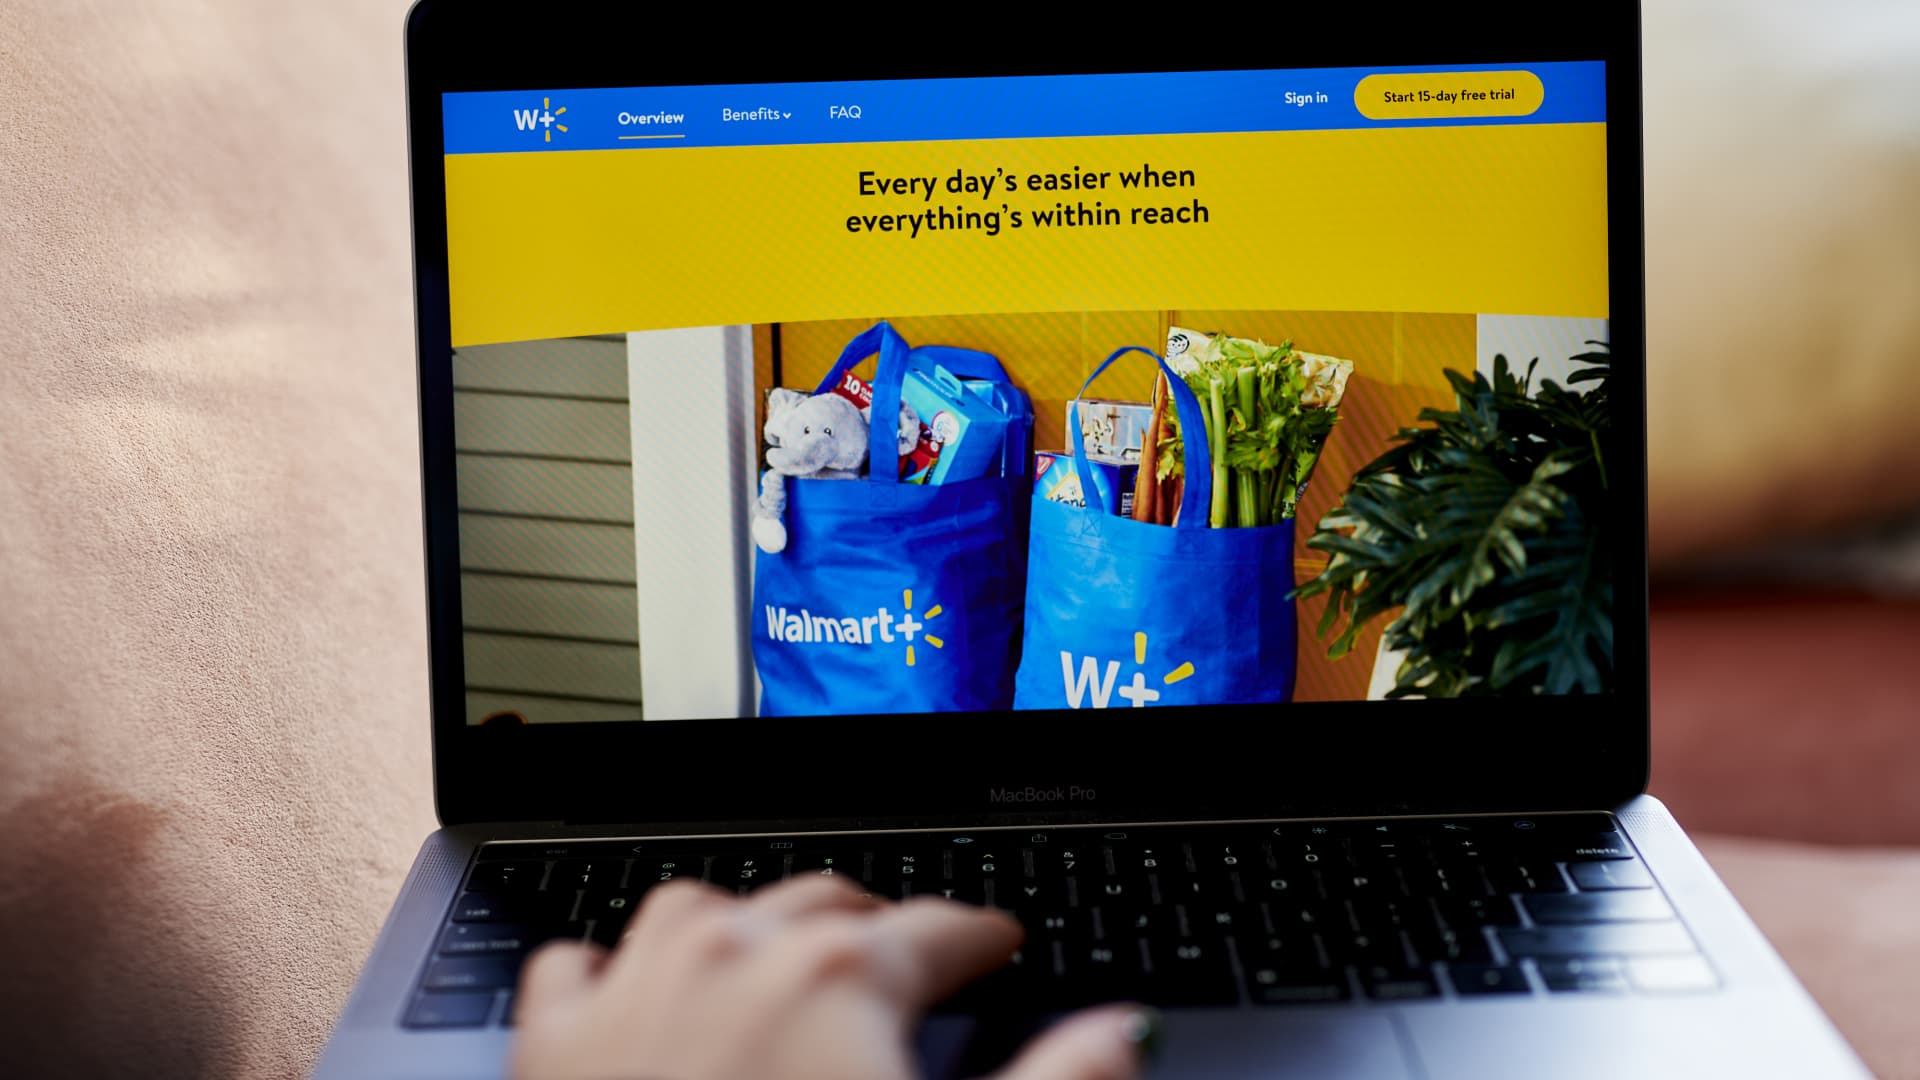 The Walmart+ home screen on a laptop computer arranged in the Brooklyn Borough of New York, U.S., on Wednesday, Nov. 18, 2020.